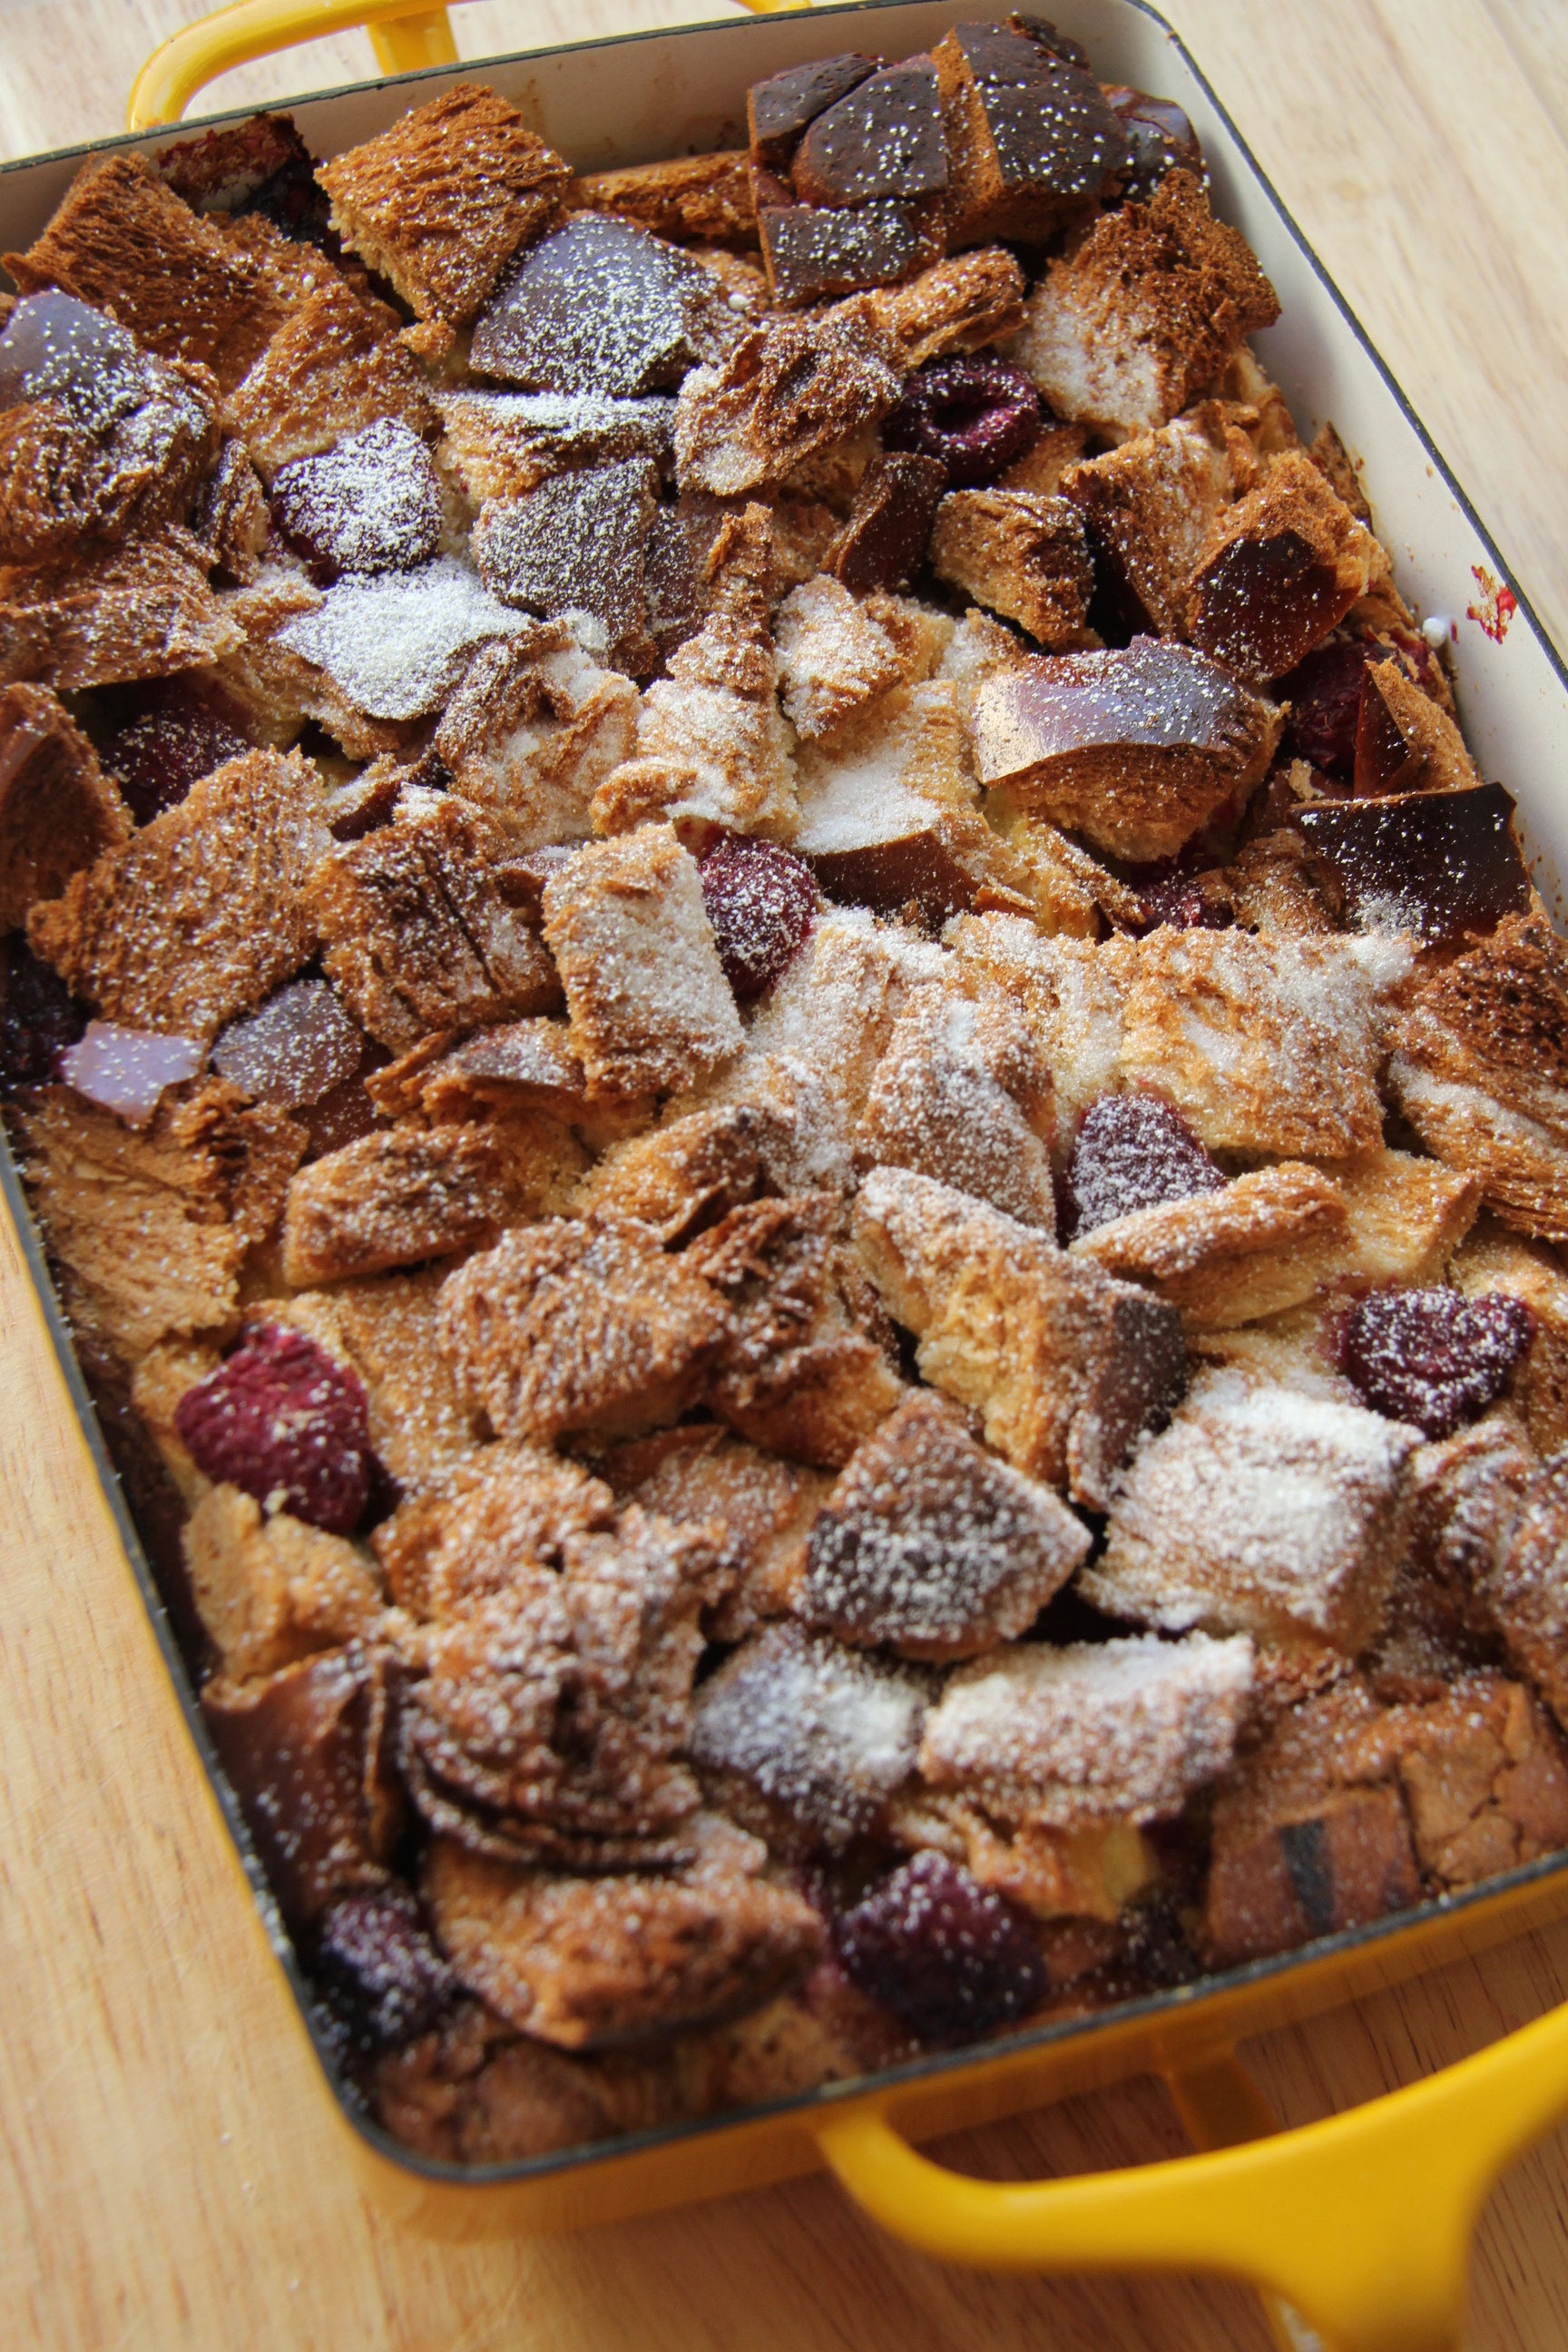 Want a guest worthy brunch recipe? This Raspberry Baked French Bread pudding has a crusty top, soft middle and sweet of berries.. it is divine!